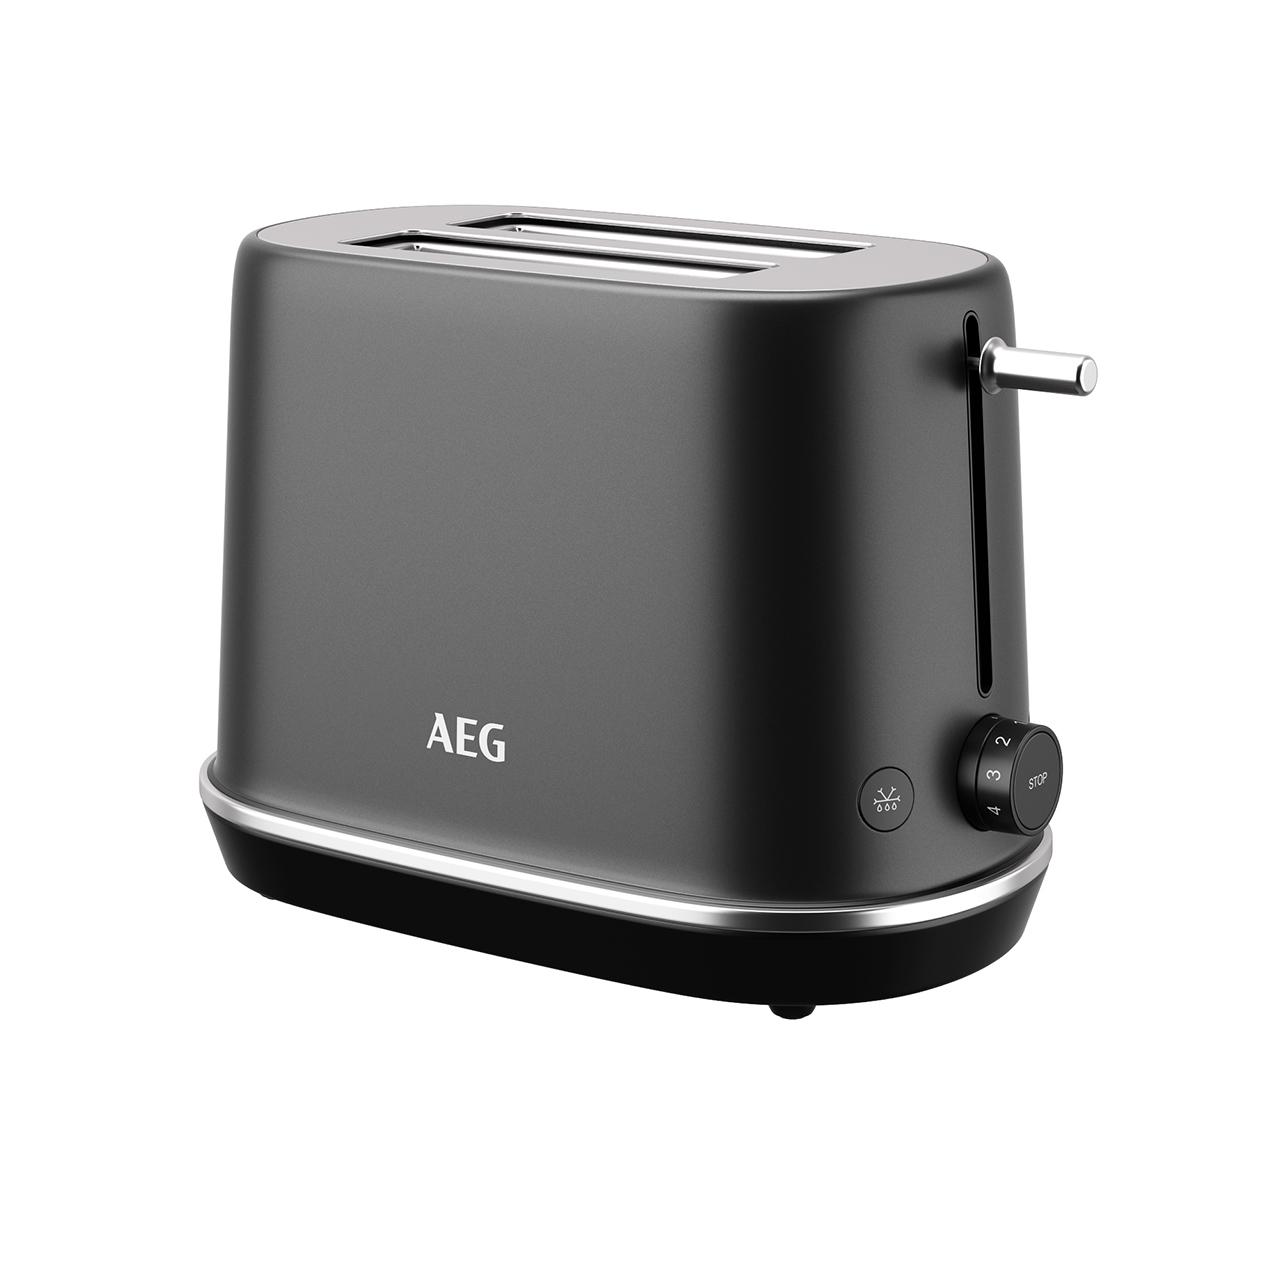 Gourmet 7 Toaster by AEG